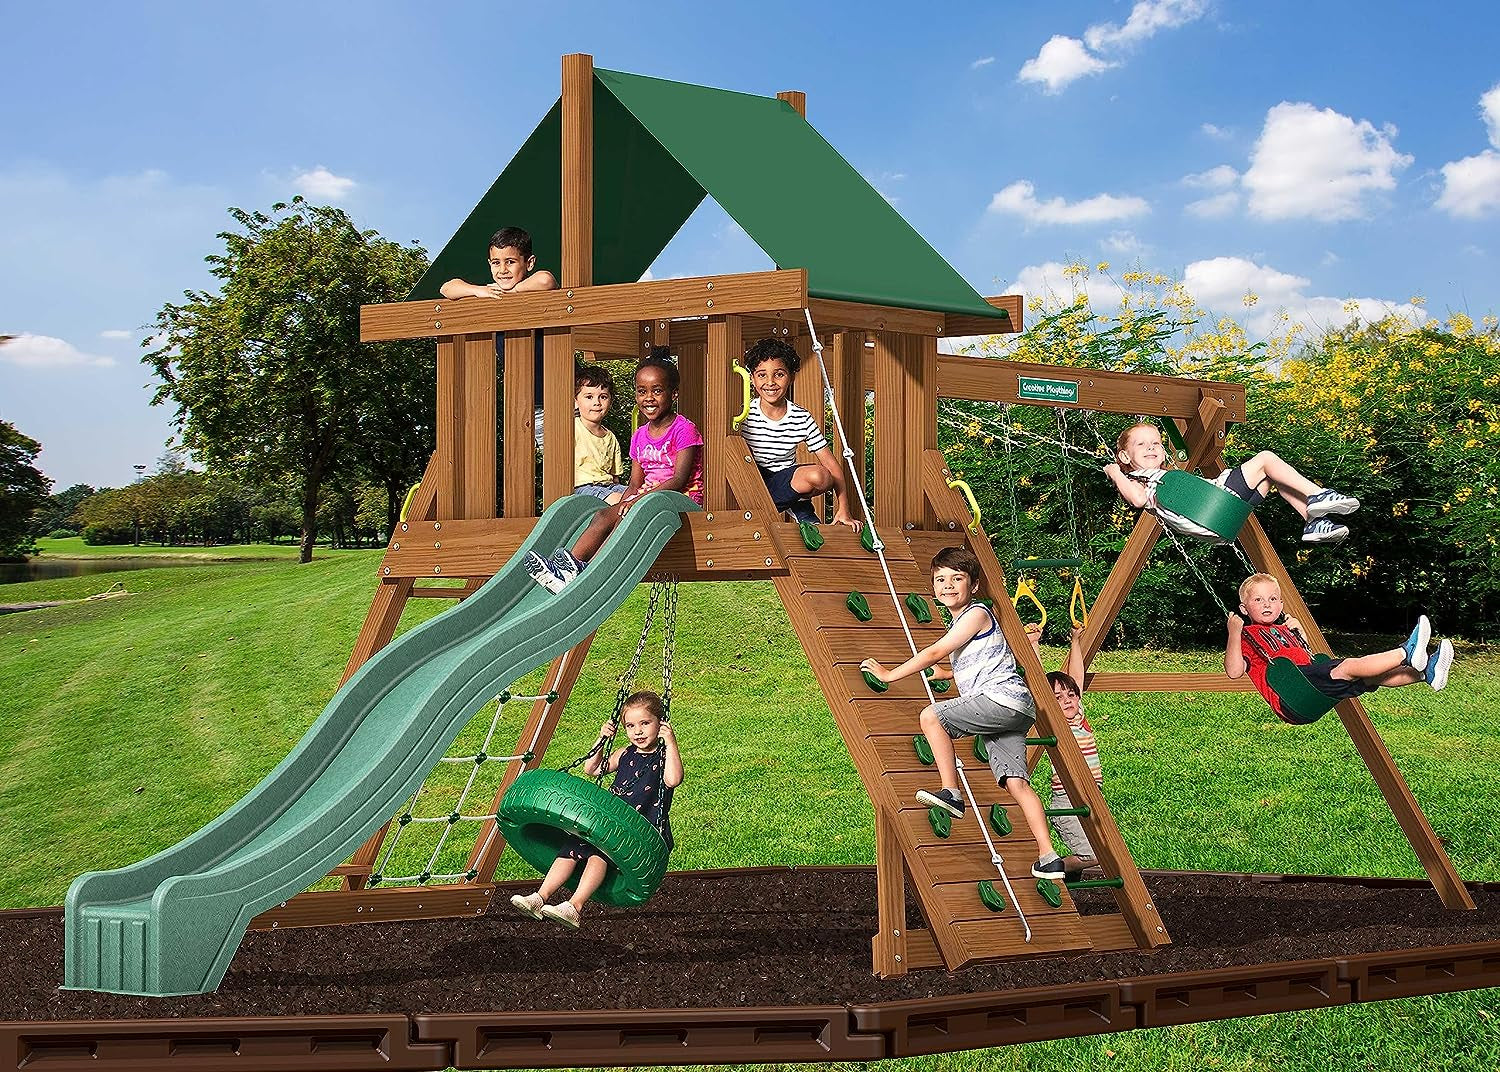 "Ultimate Outdoor Fun: Creative Playthings Northbridge Pack 1 Wooden Swing Set - Made in the USA! Features Climbing Wall, Playground Swings, Slide, and Tire Swing - 22 X 12 X 11 Ft!"